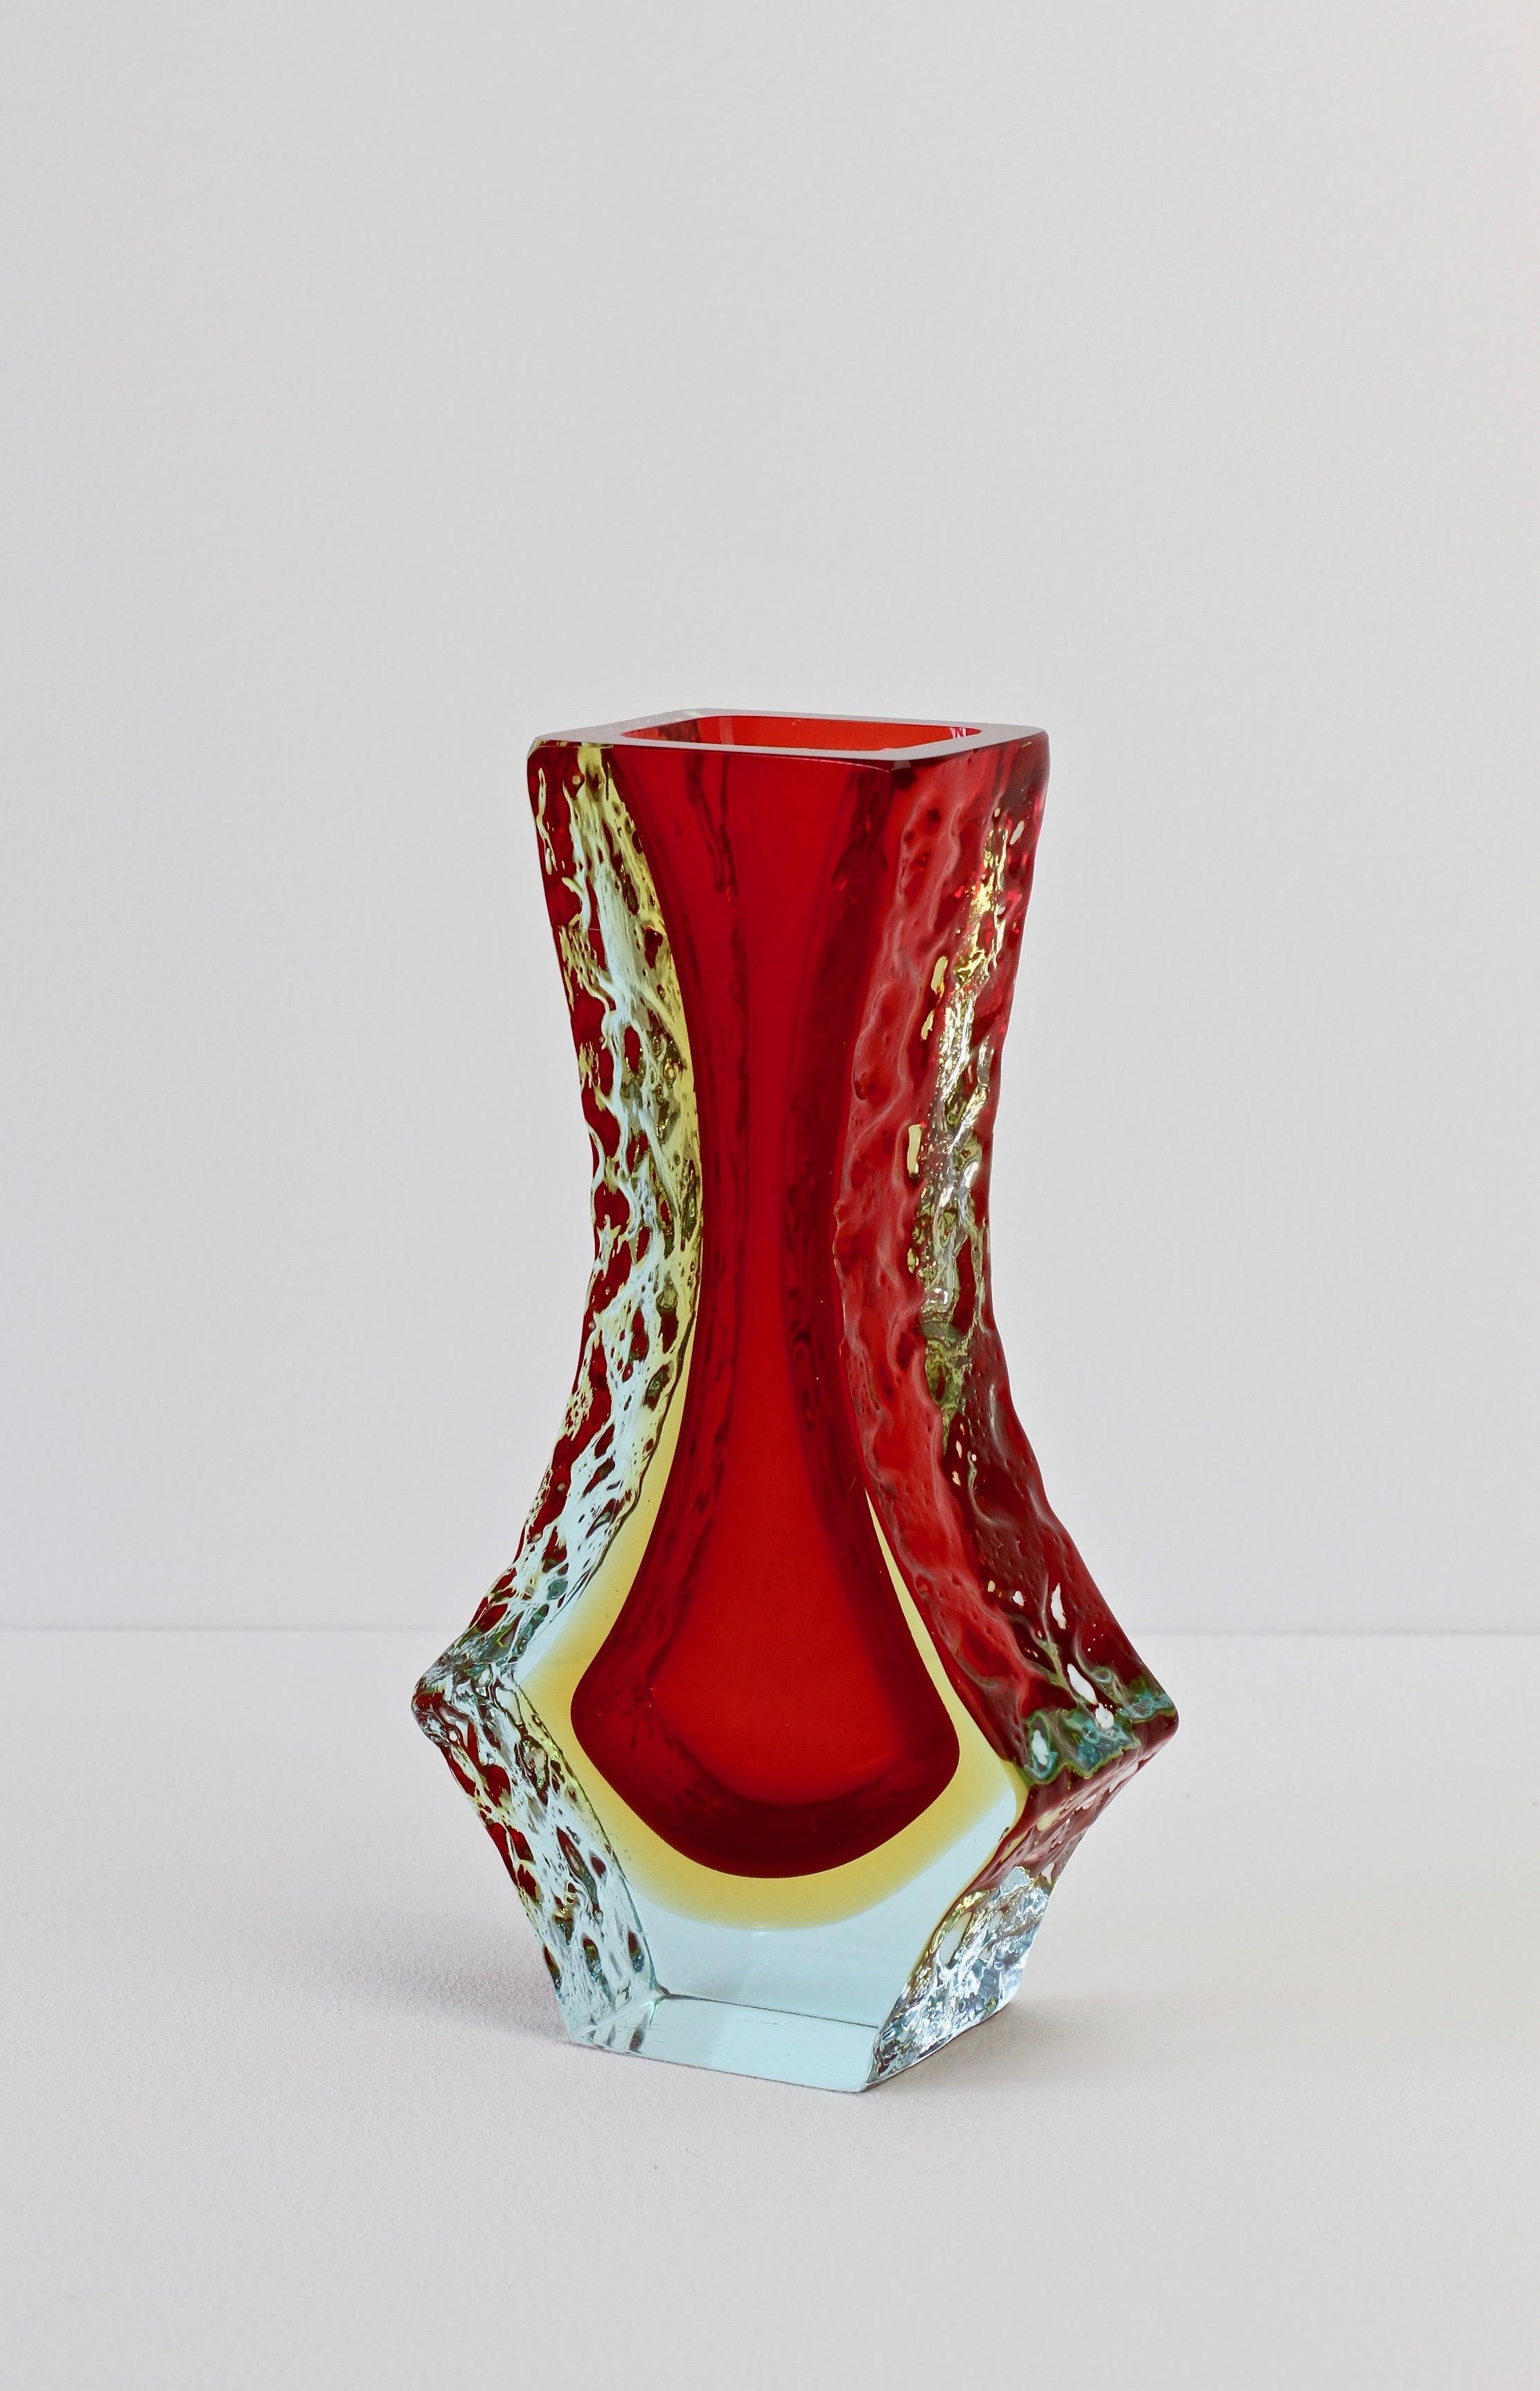 Italian Textured Faceted Murano 'Sommerso' Glass Vase Attributed to Mandruzzato 4